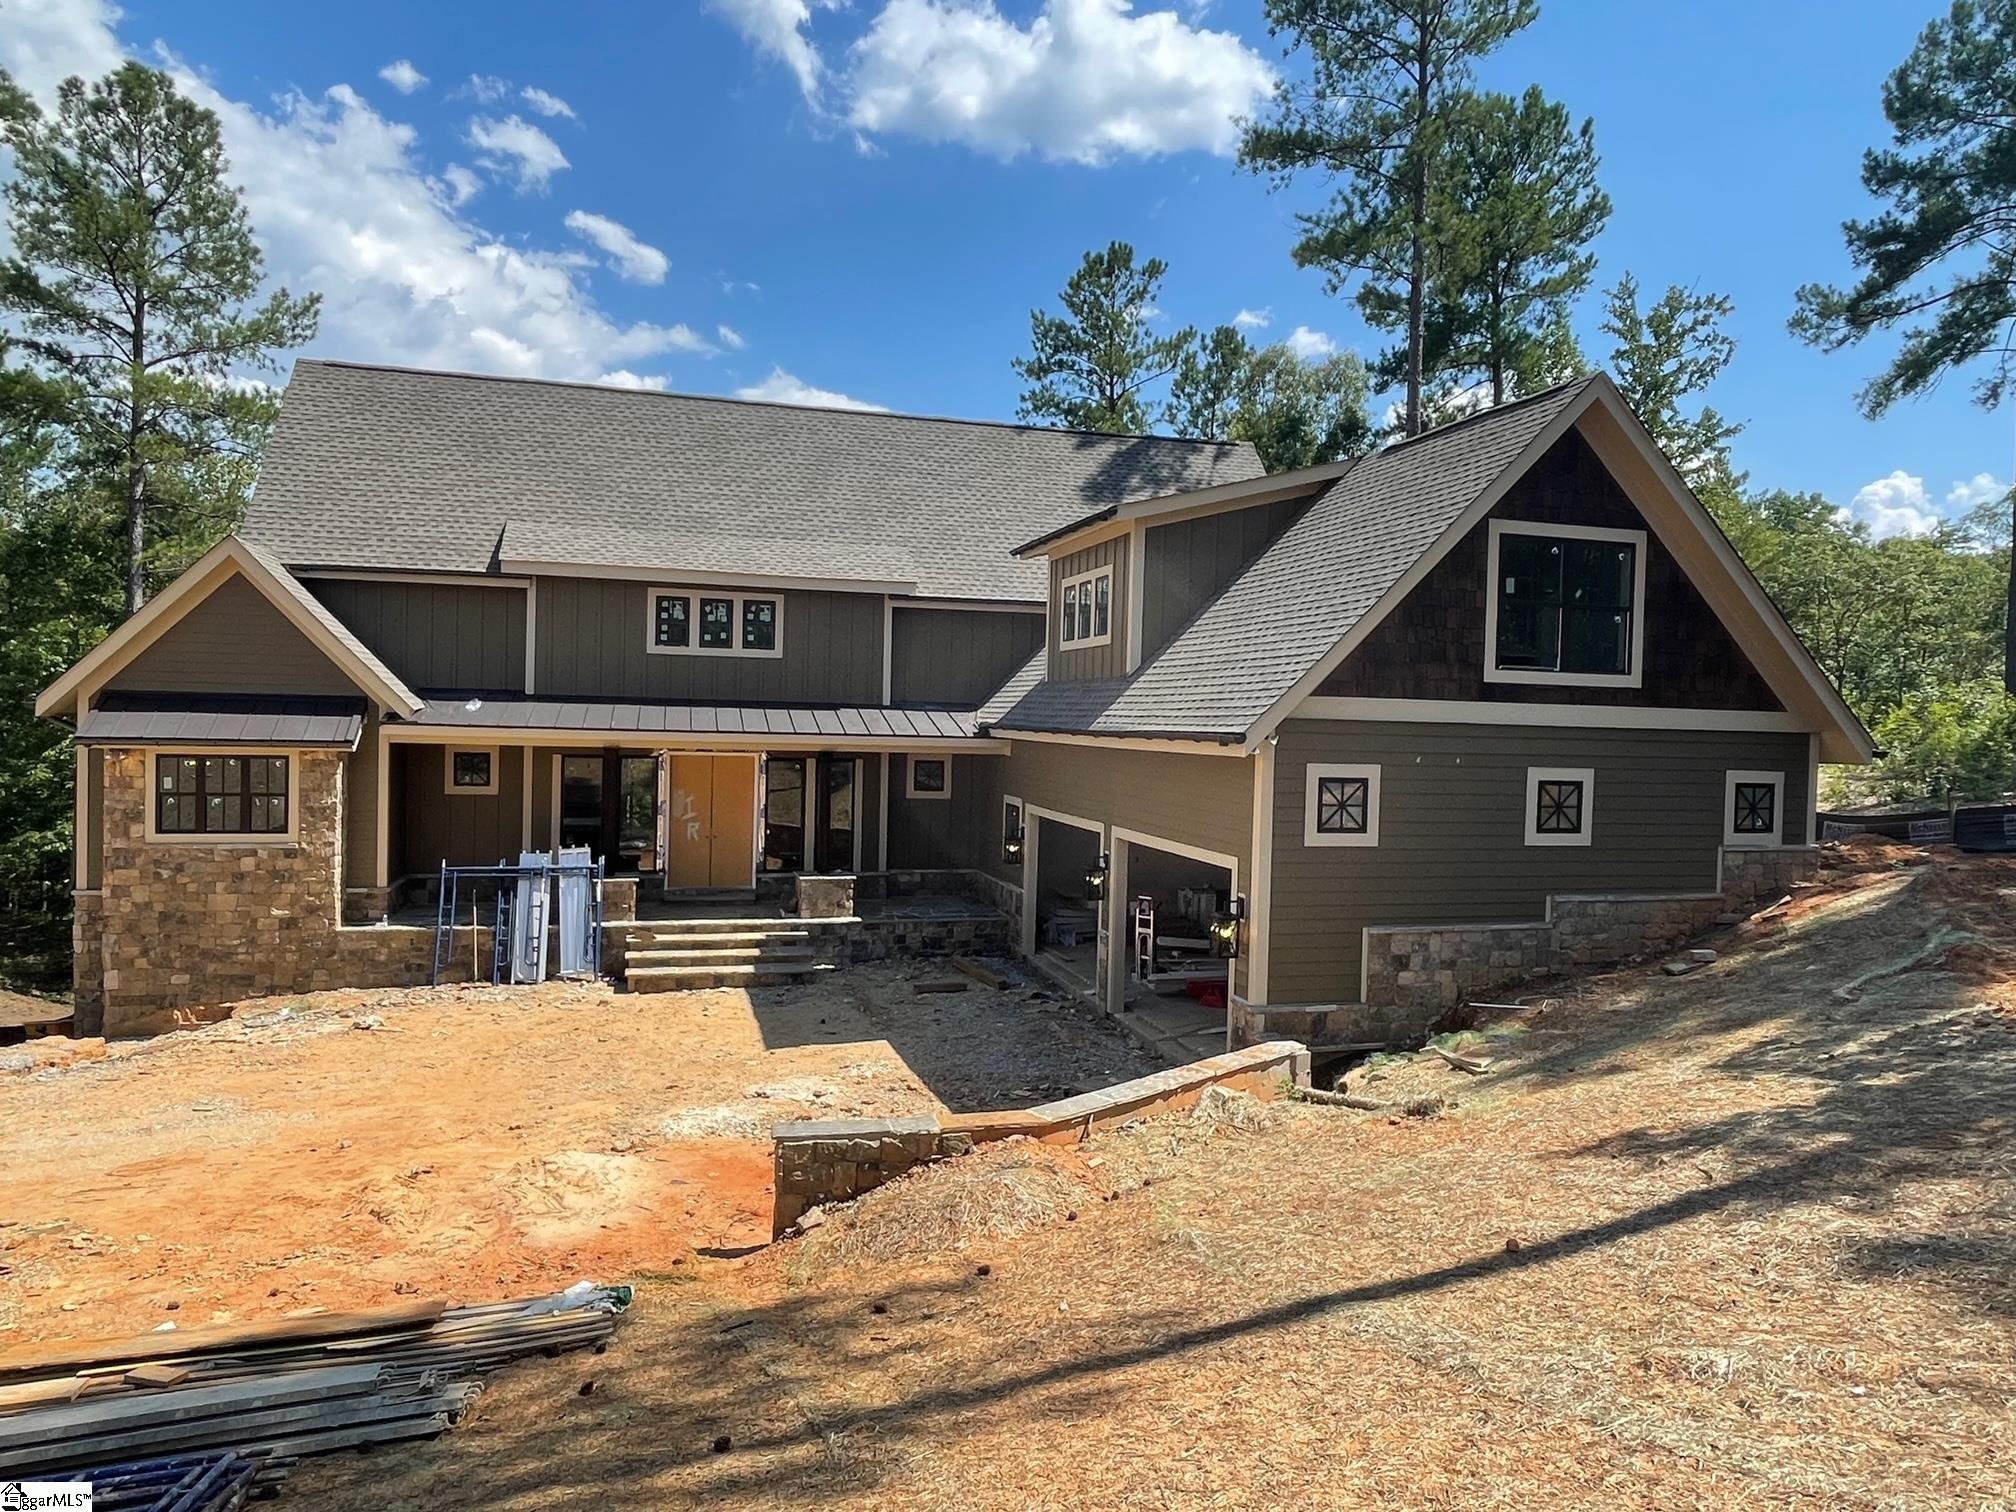 New construction waterfront home in the North Point section of the Cliffs at Keowee Falls. This 4 bedroom home plus bonus room features an open floor plan for entertainment and a highly functional design on the main level including a large master suite, large coffered ceiling great room for dining and casual living opening to a covered deck, open kitchen with large walk in pantry, and large laundry/mudroom.  With a walkout terrace level below you will find an additional guest suite, large entertainment area with wet bar, and a large lake toys storage room.  Upstairs you will find a very generous bonus room (options: office, exercise room, bunk room) above the oversized garage plus 2 additional guest suites with lake view.  Offering nice views of the lake, a dock to be placed on this .68 acre lot, a generous landscape package, a home automation package and many other features, this new home is a rare offering in the Cliffs communities.